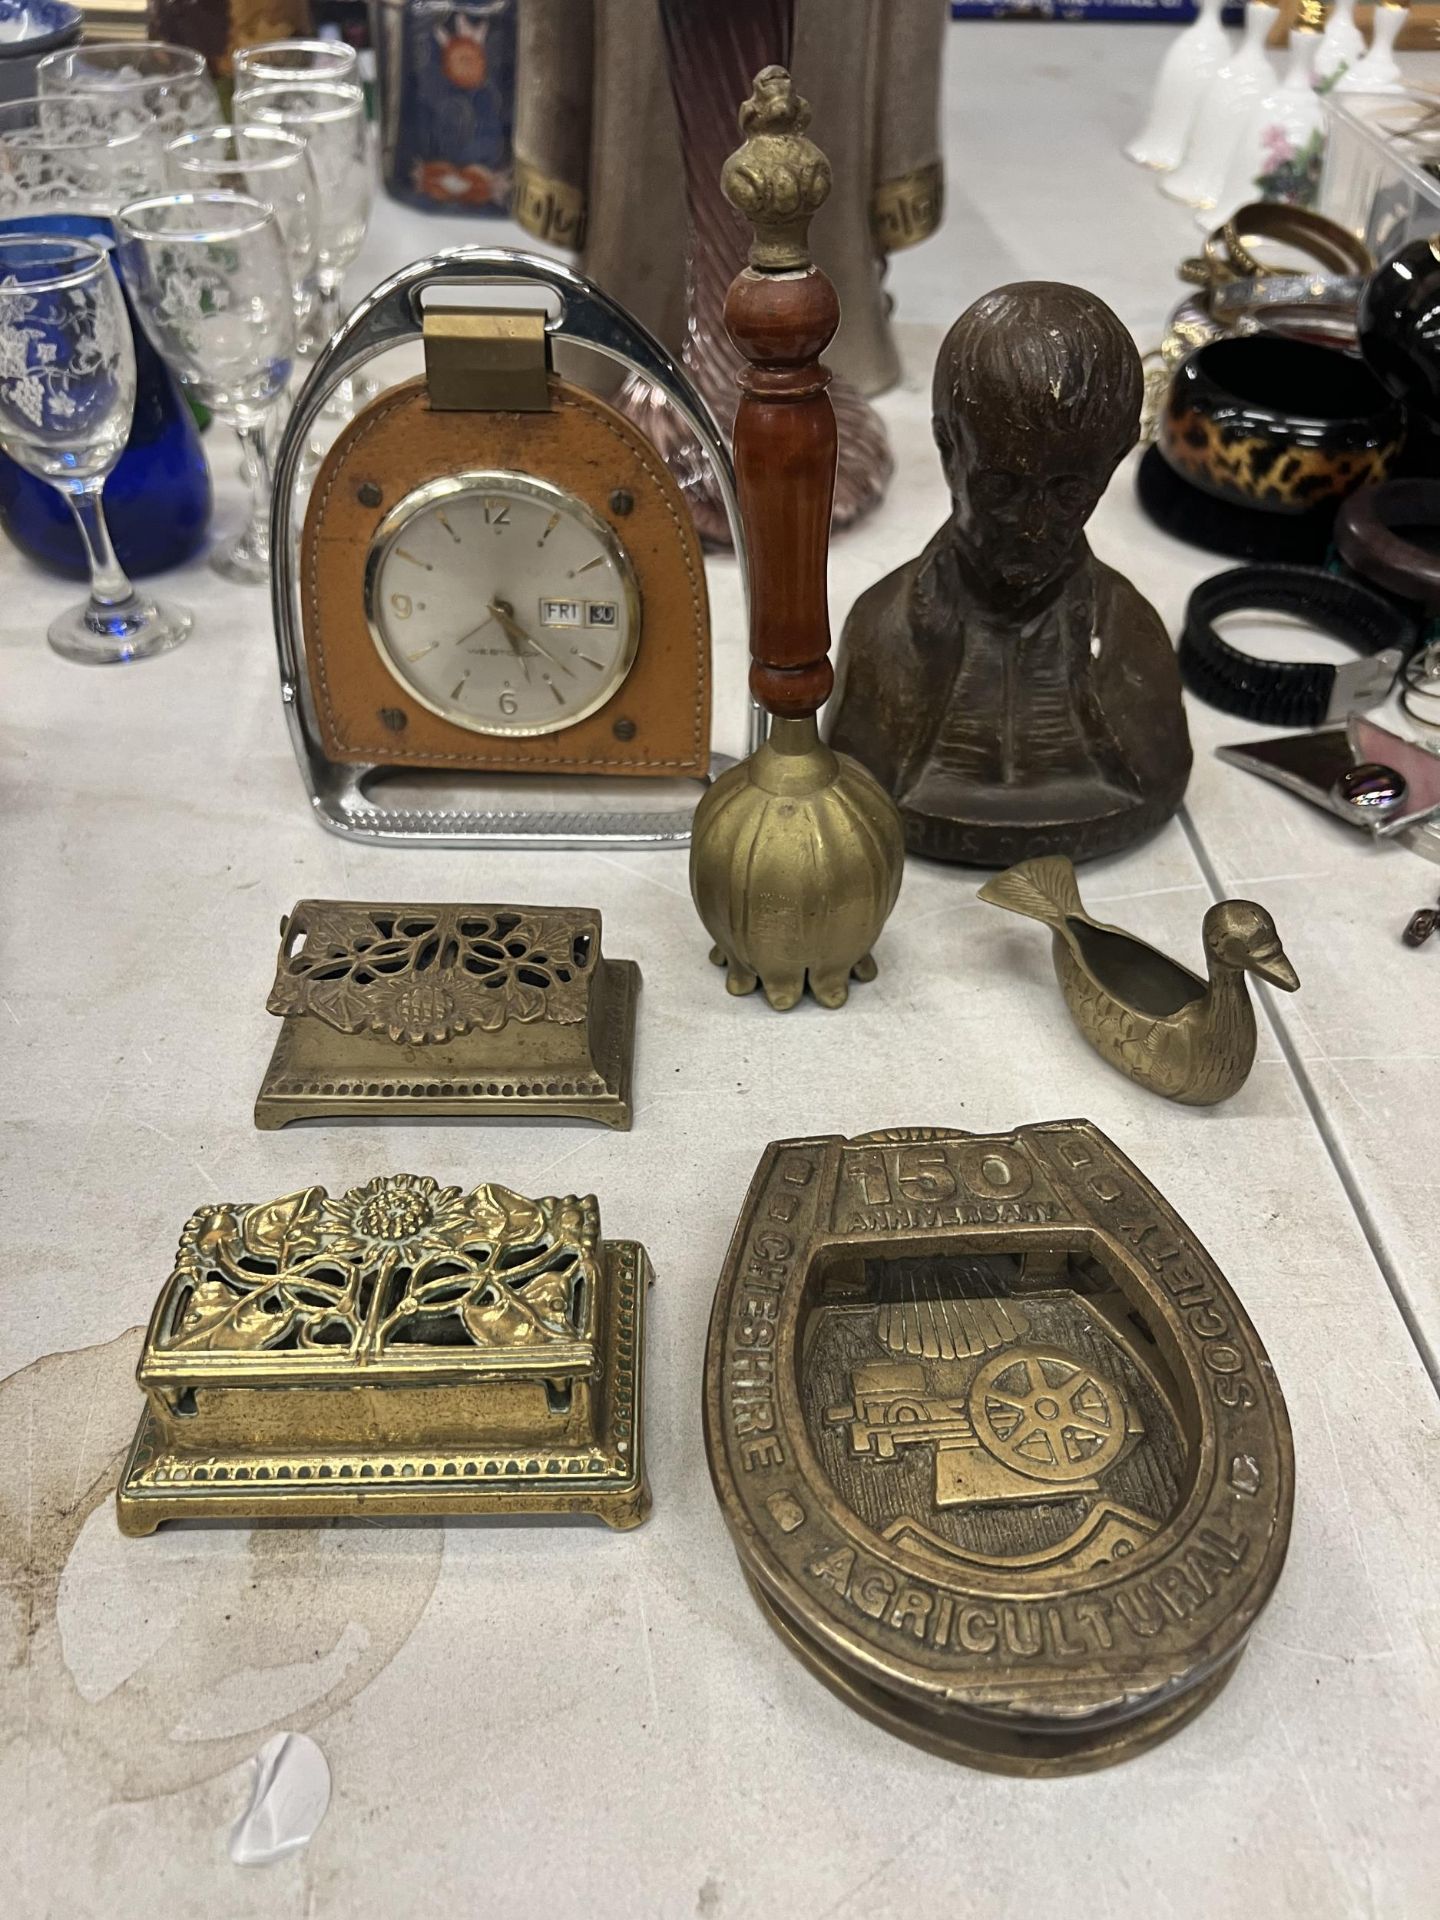 A VINTAGE CLOCK IN A STIRRUP, TWO BRASS STAMP BOXES, A CHESHIRE AGRICULTURAL SOCIETY HORSESHOE